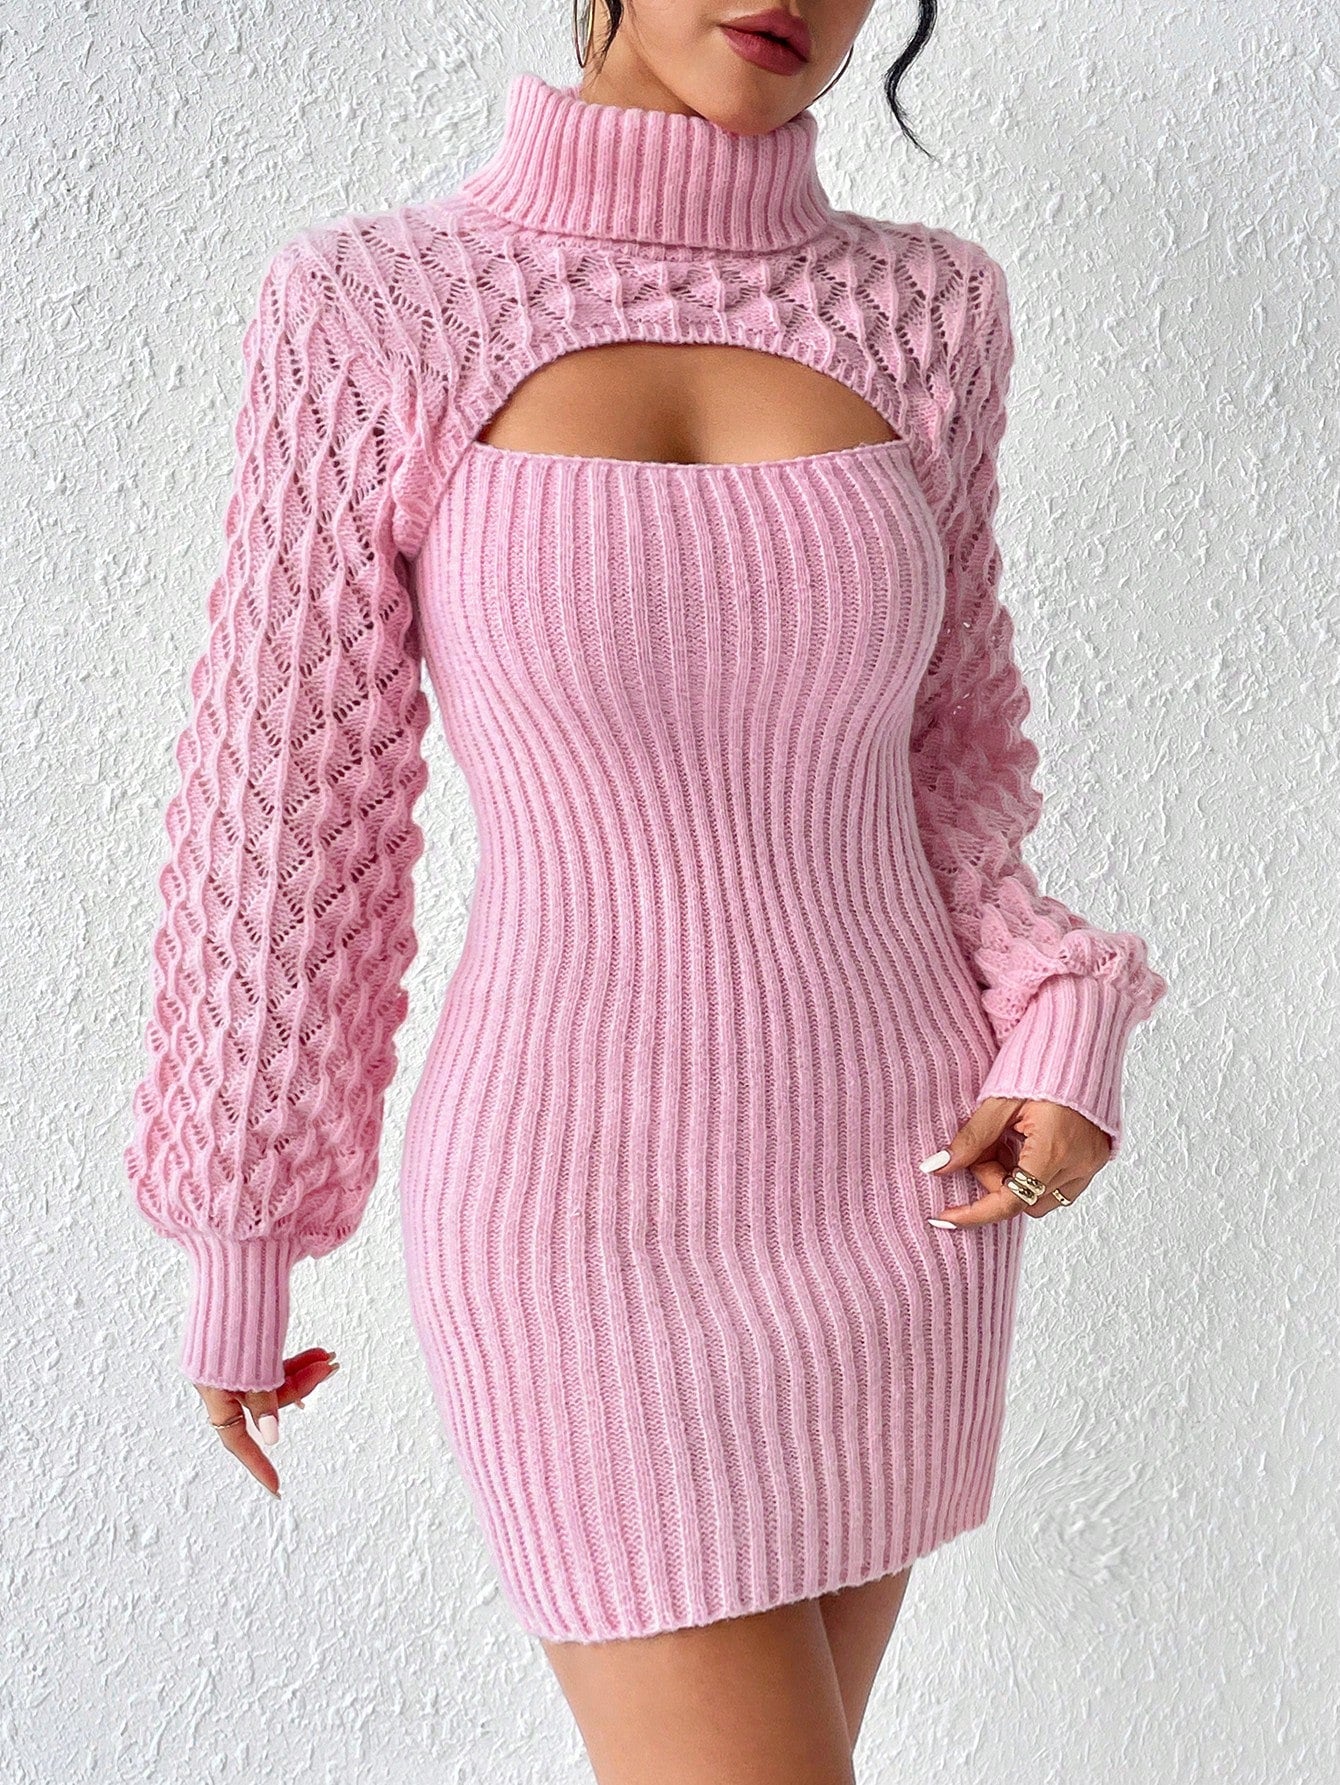 Women's High Neck Hollow Out Knitted Sweater Dress